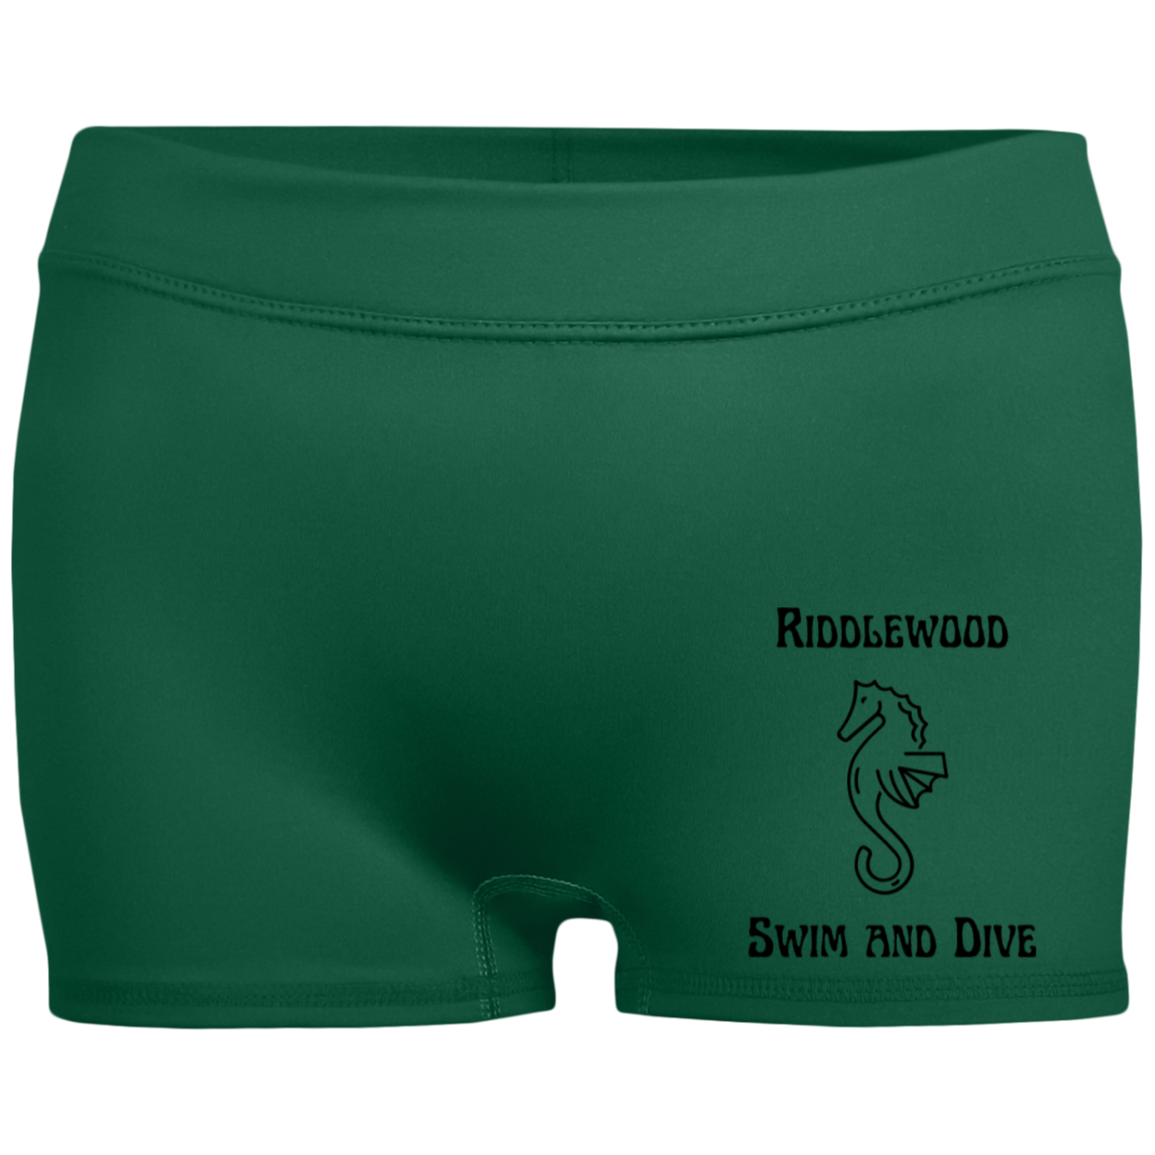 Riddlewood swim and dive TeamStore Ladies' Fitted Moisture-Wicking 2.5 inch Inseam Shorts